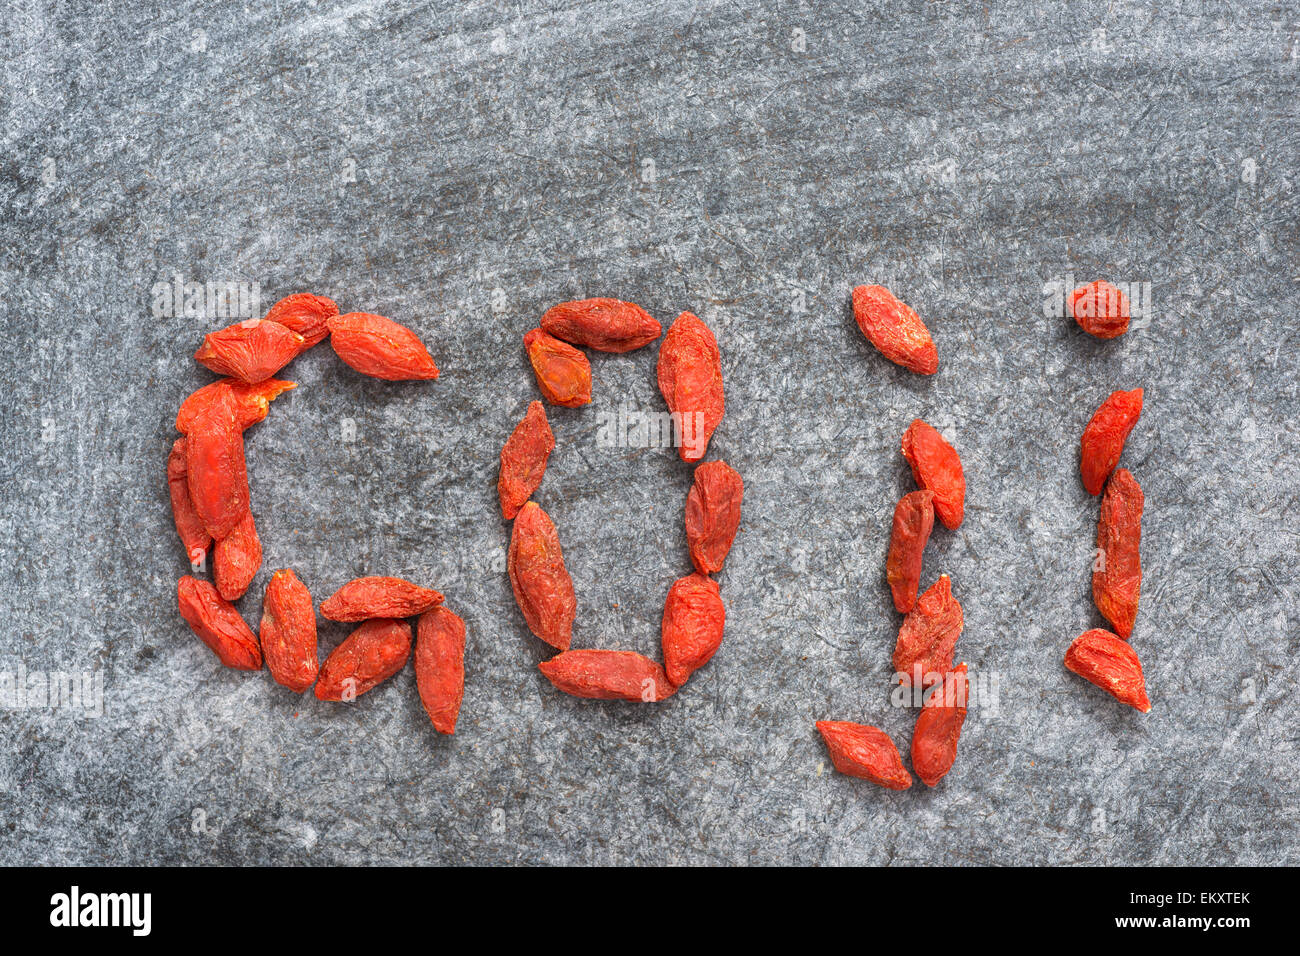 Goji word made from dry red berries on blackboard surface Stock Photo